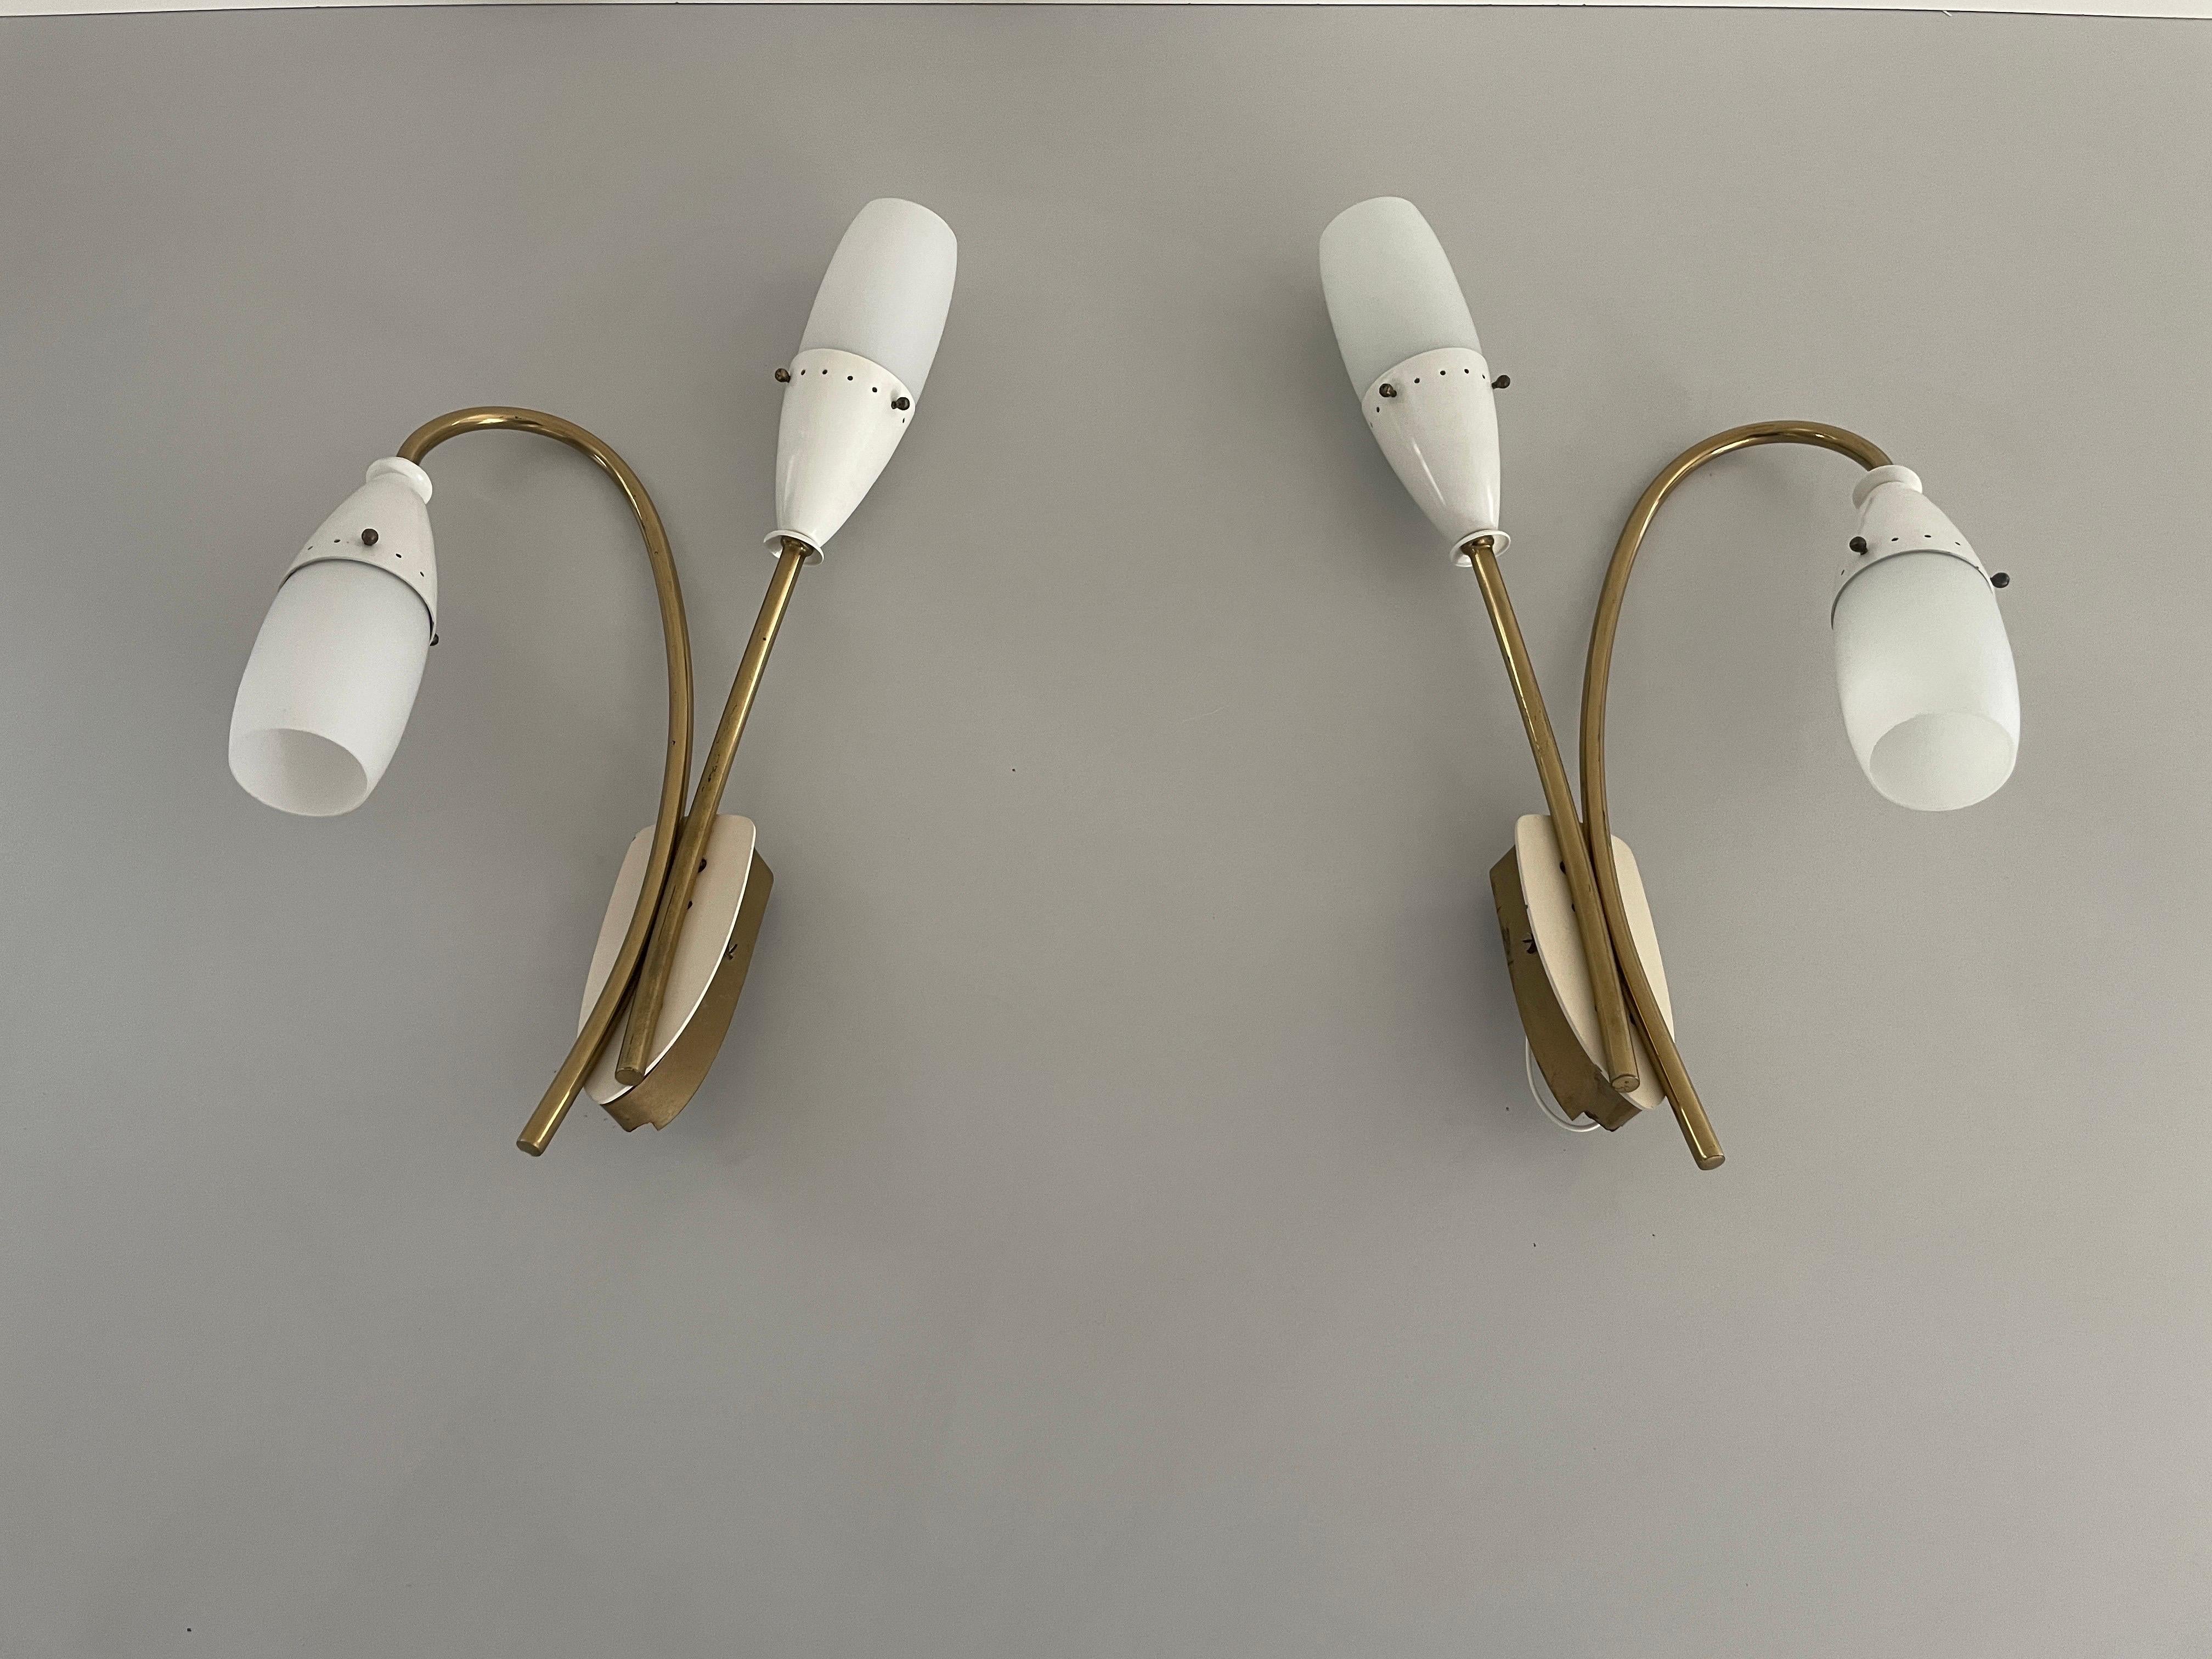 Glass and White Metal Twin Head Sputnik Pair of Sconces, 1950s, Italy

Very elegant and Minimalist wall lamps.

Lamps are in excellent condition.

These lamps works with E14 standard light bulbs. 
Wired and suitable to use in all countries. (110-220